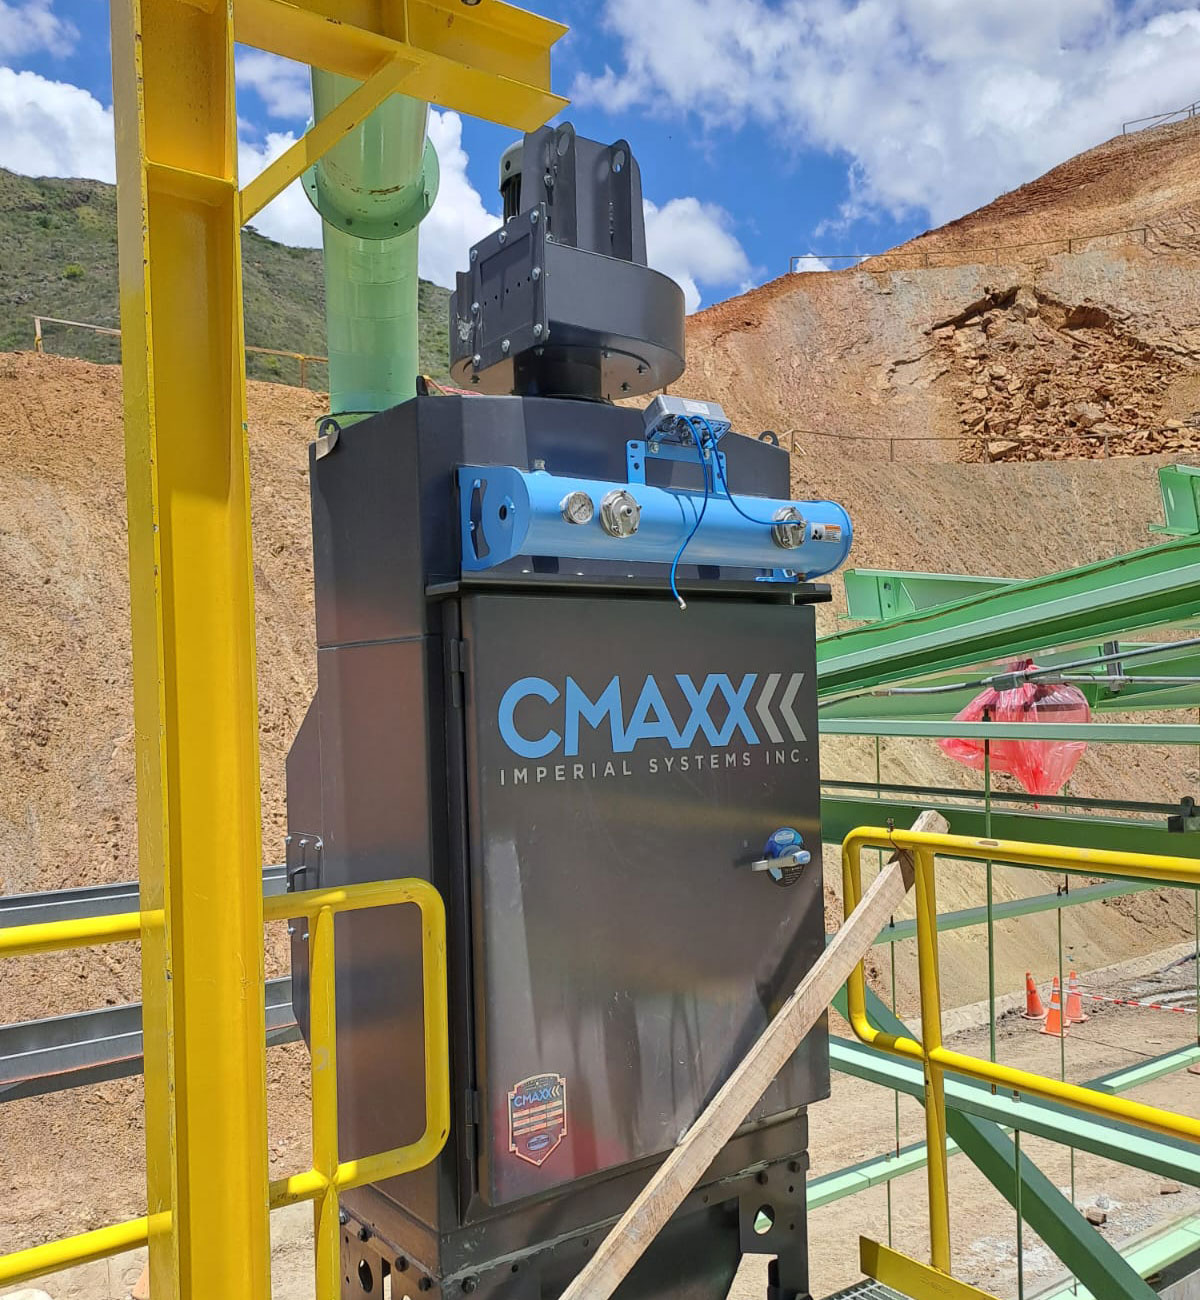 Installation of a CMAXX dust collector at a mining site to capture dust from silica, coal, asbestos, lead and mercury